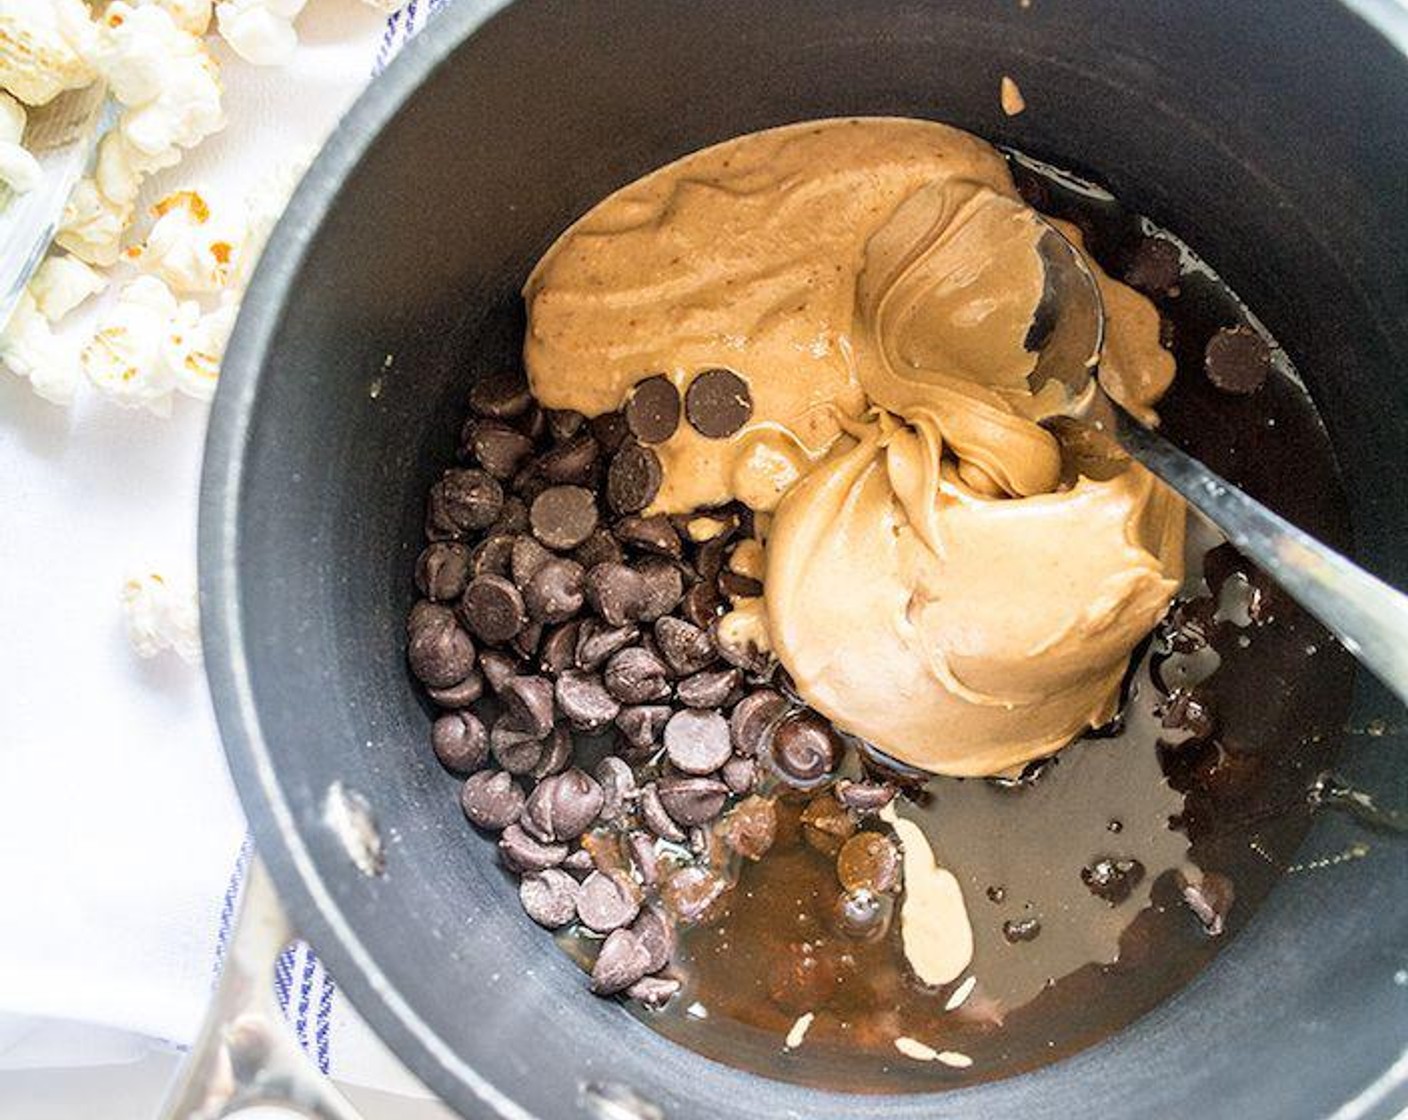 step 1 Mix Powdered Peanut Butter (1/4 cup) with Water (3 Tbsp), then add to small sauce pan with Semi-Sweet Chocolate Chips (1/2 cup), Creamy Peanut Butter (1/4 cup) and Raw Honey (1/3 cup). Cook over medium-low heat, stirring continuously, until all chocolate chips have melted and ingredients are well combined.